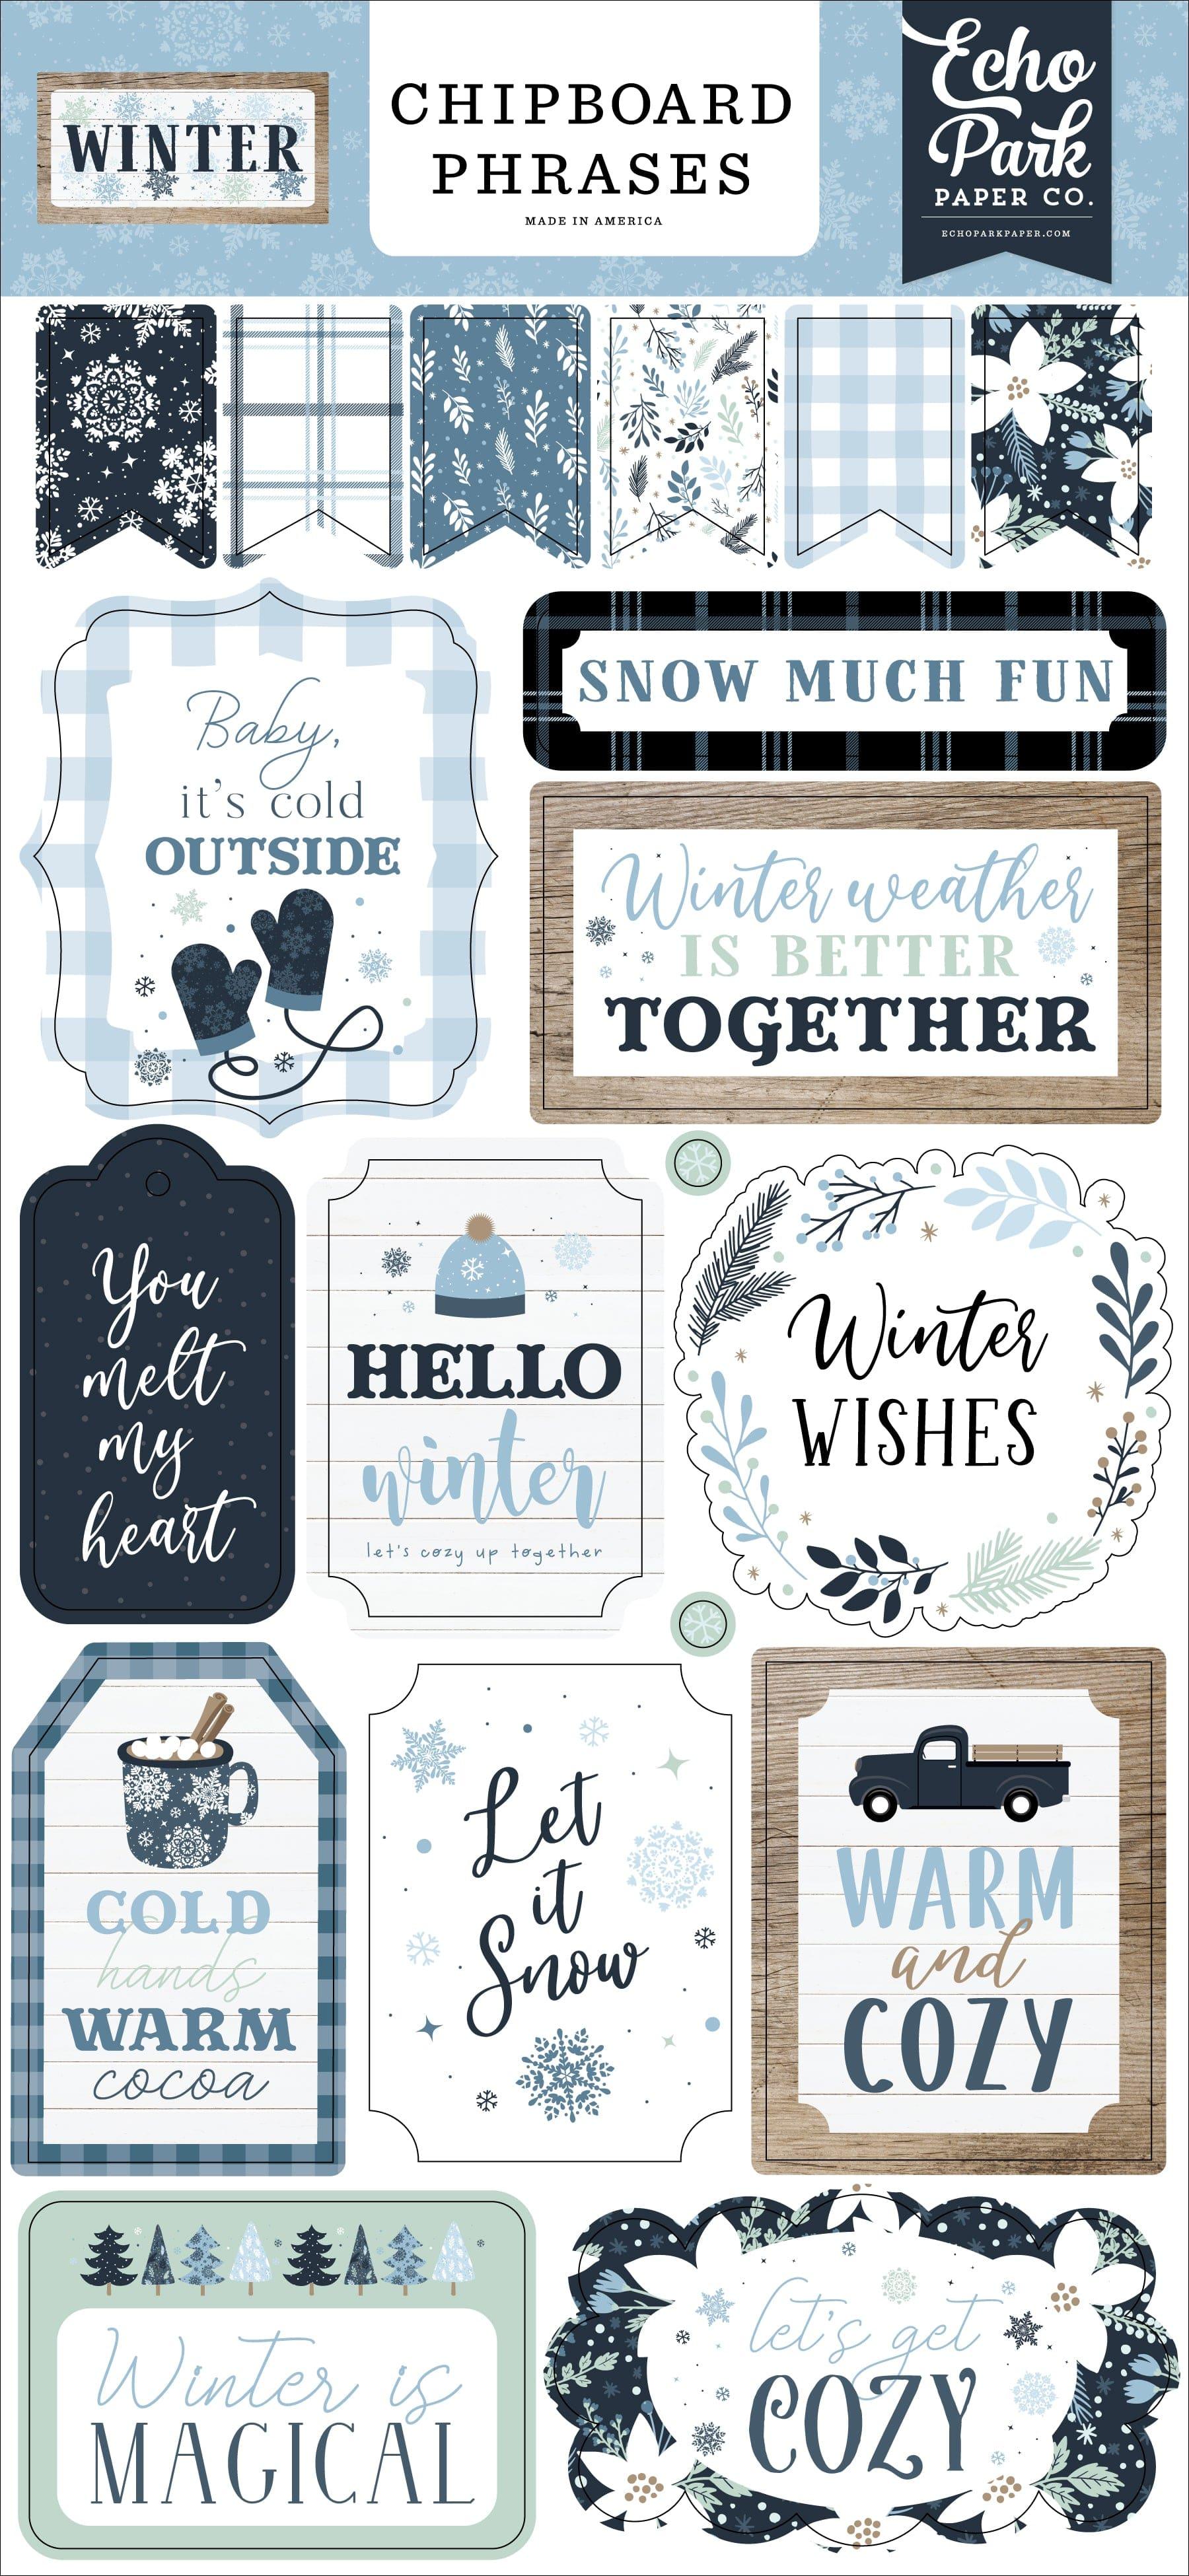 Winter Collection 6 x 12 Scrapbook Chipboard Phrases by Echo Park Paper - Scrapbook Supply Companies